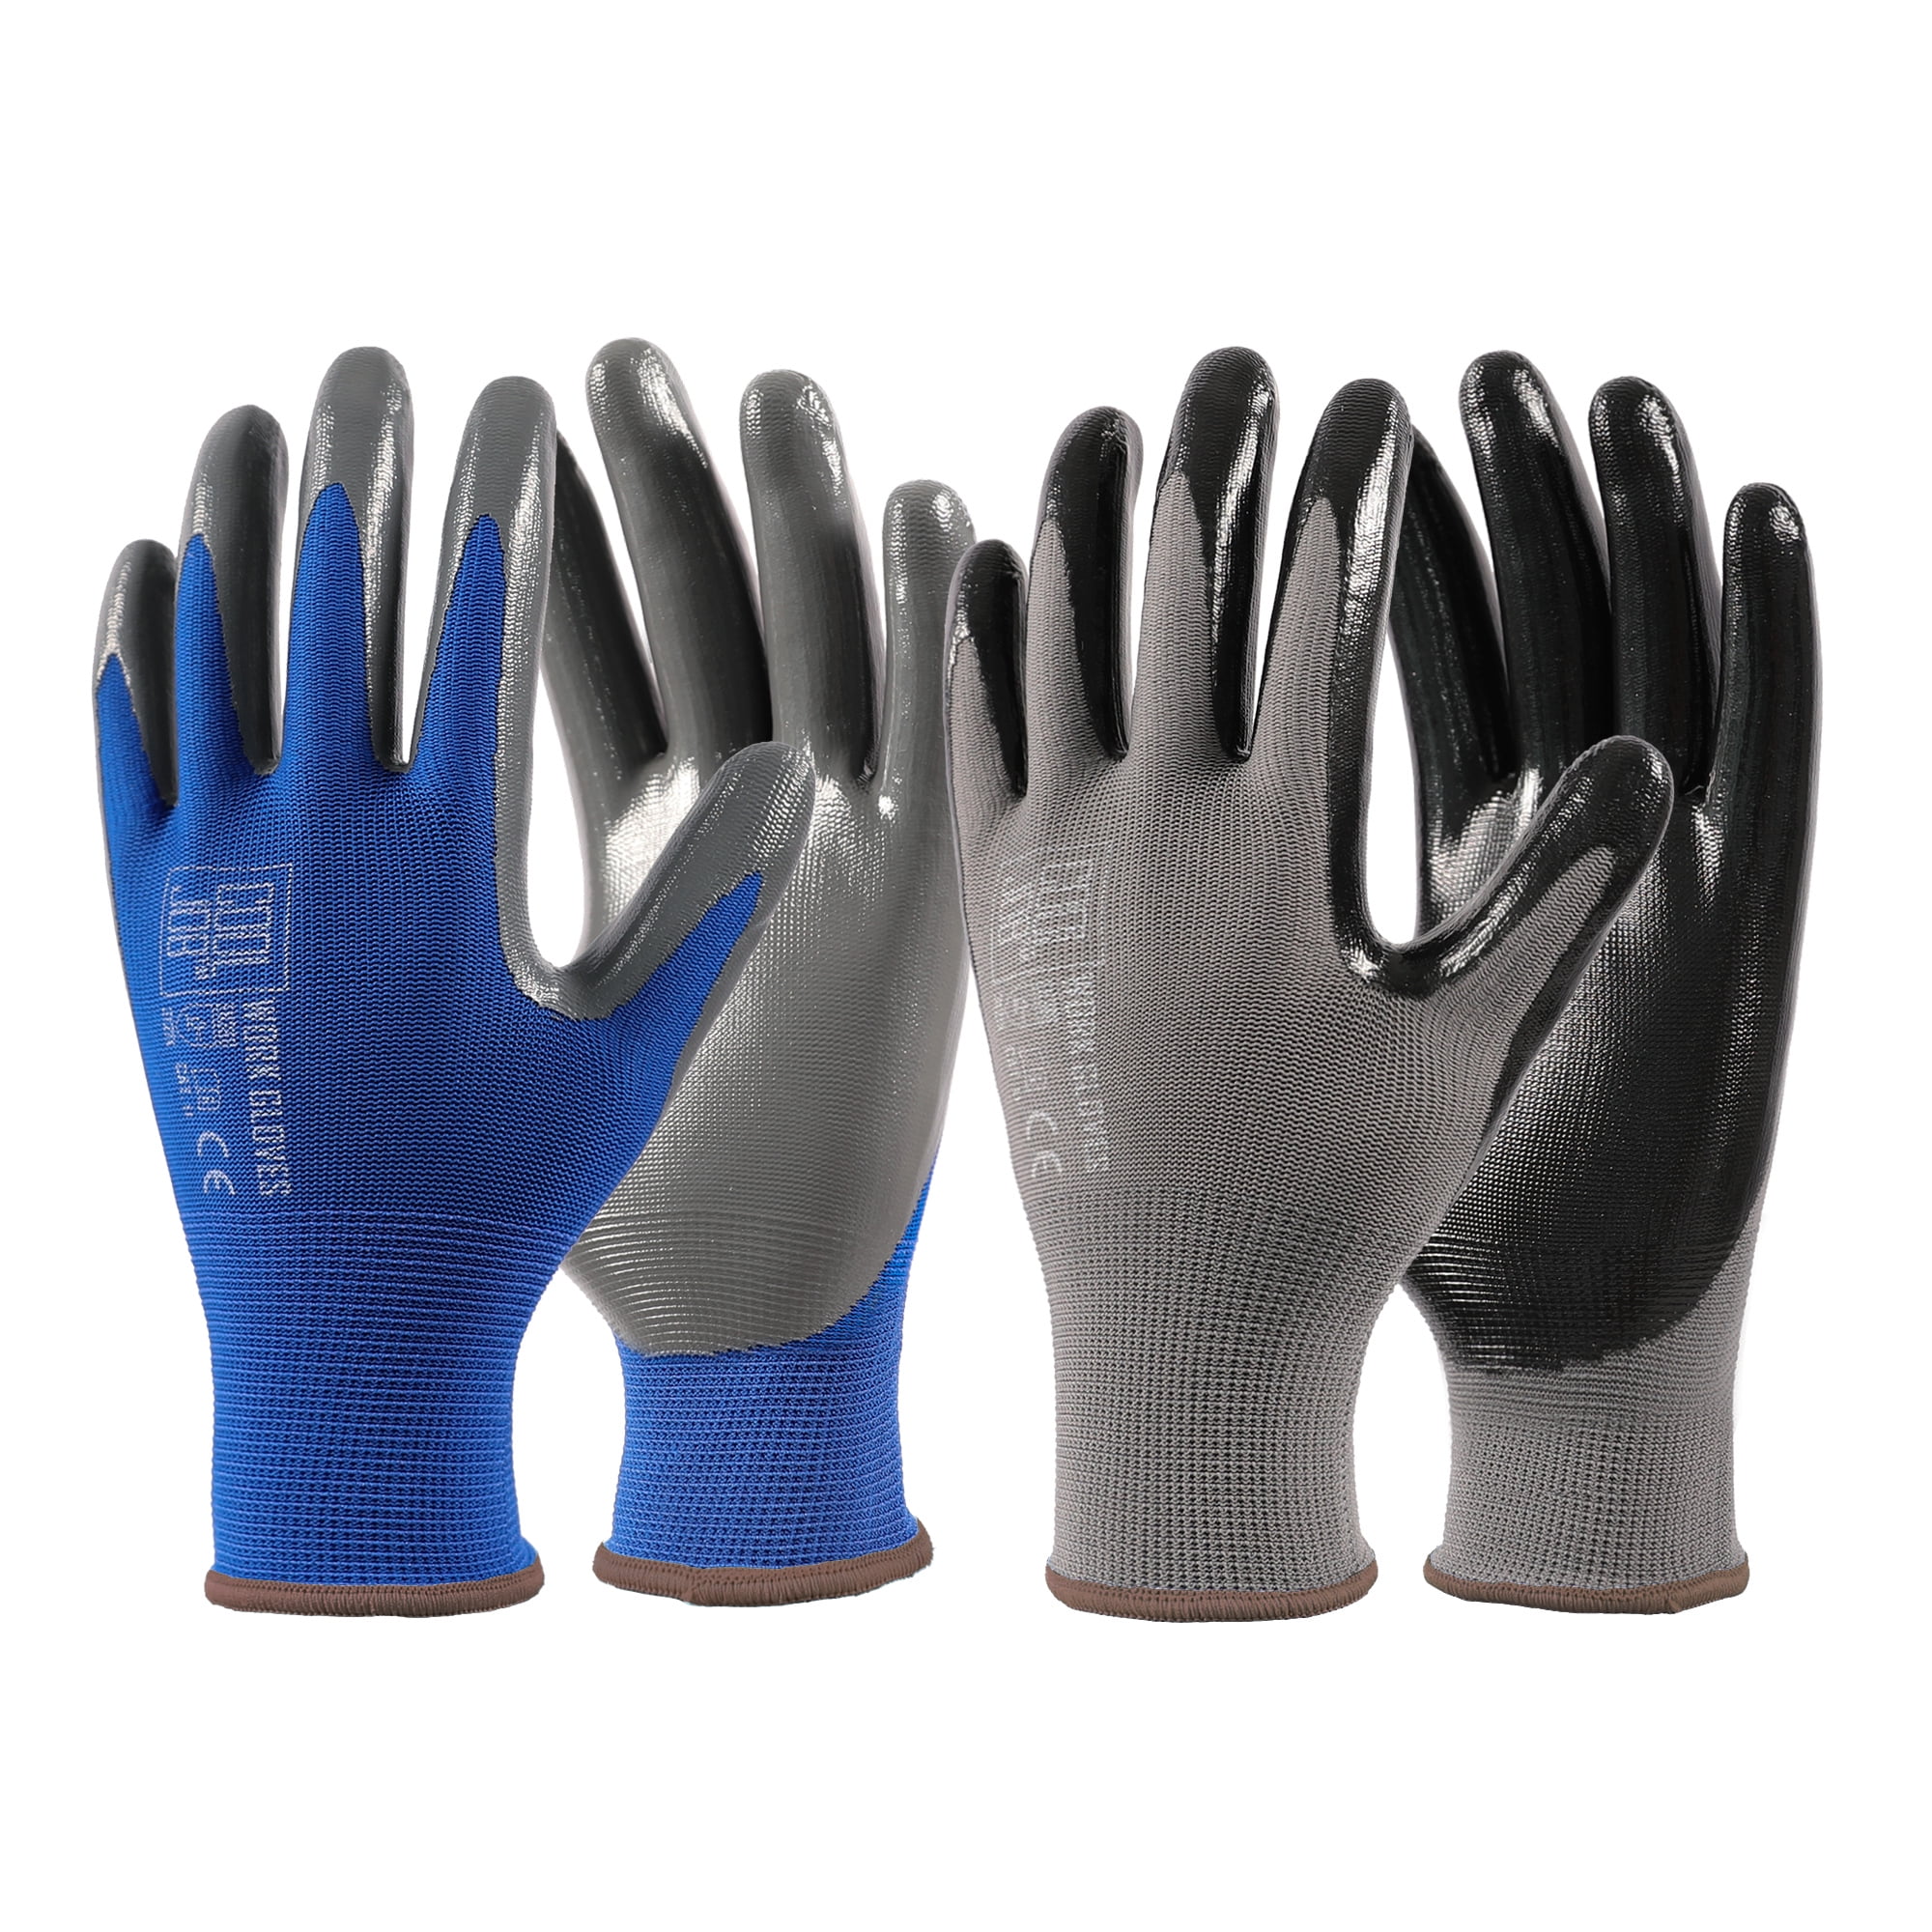 Safety Work Gloves Latex Coated for Men and Women 10-Pair-Pack Knit Firm Grip